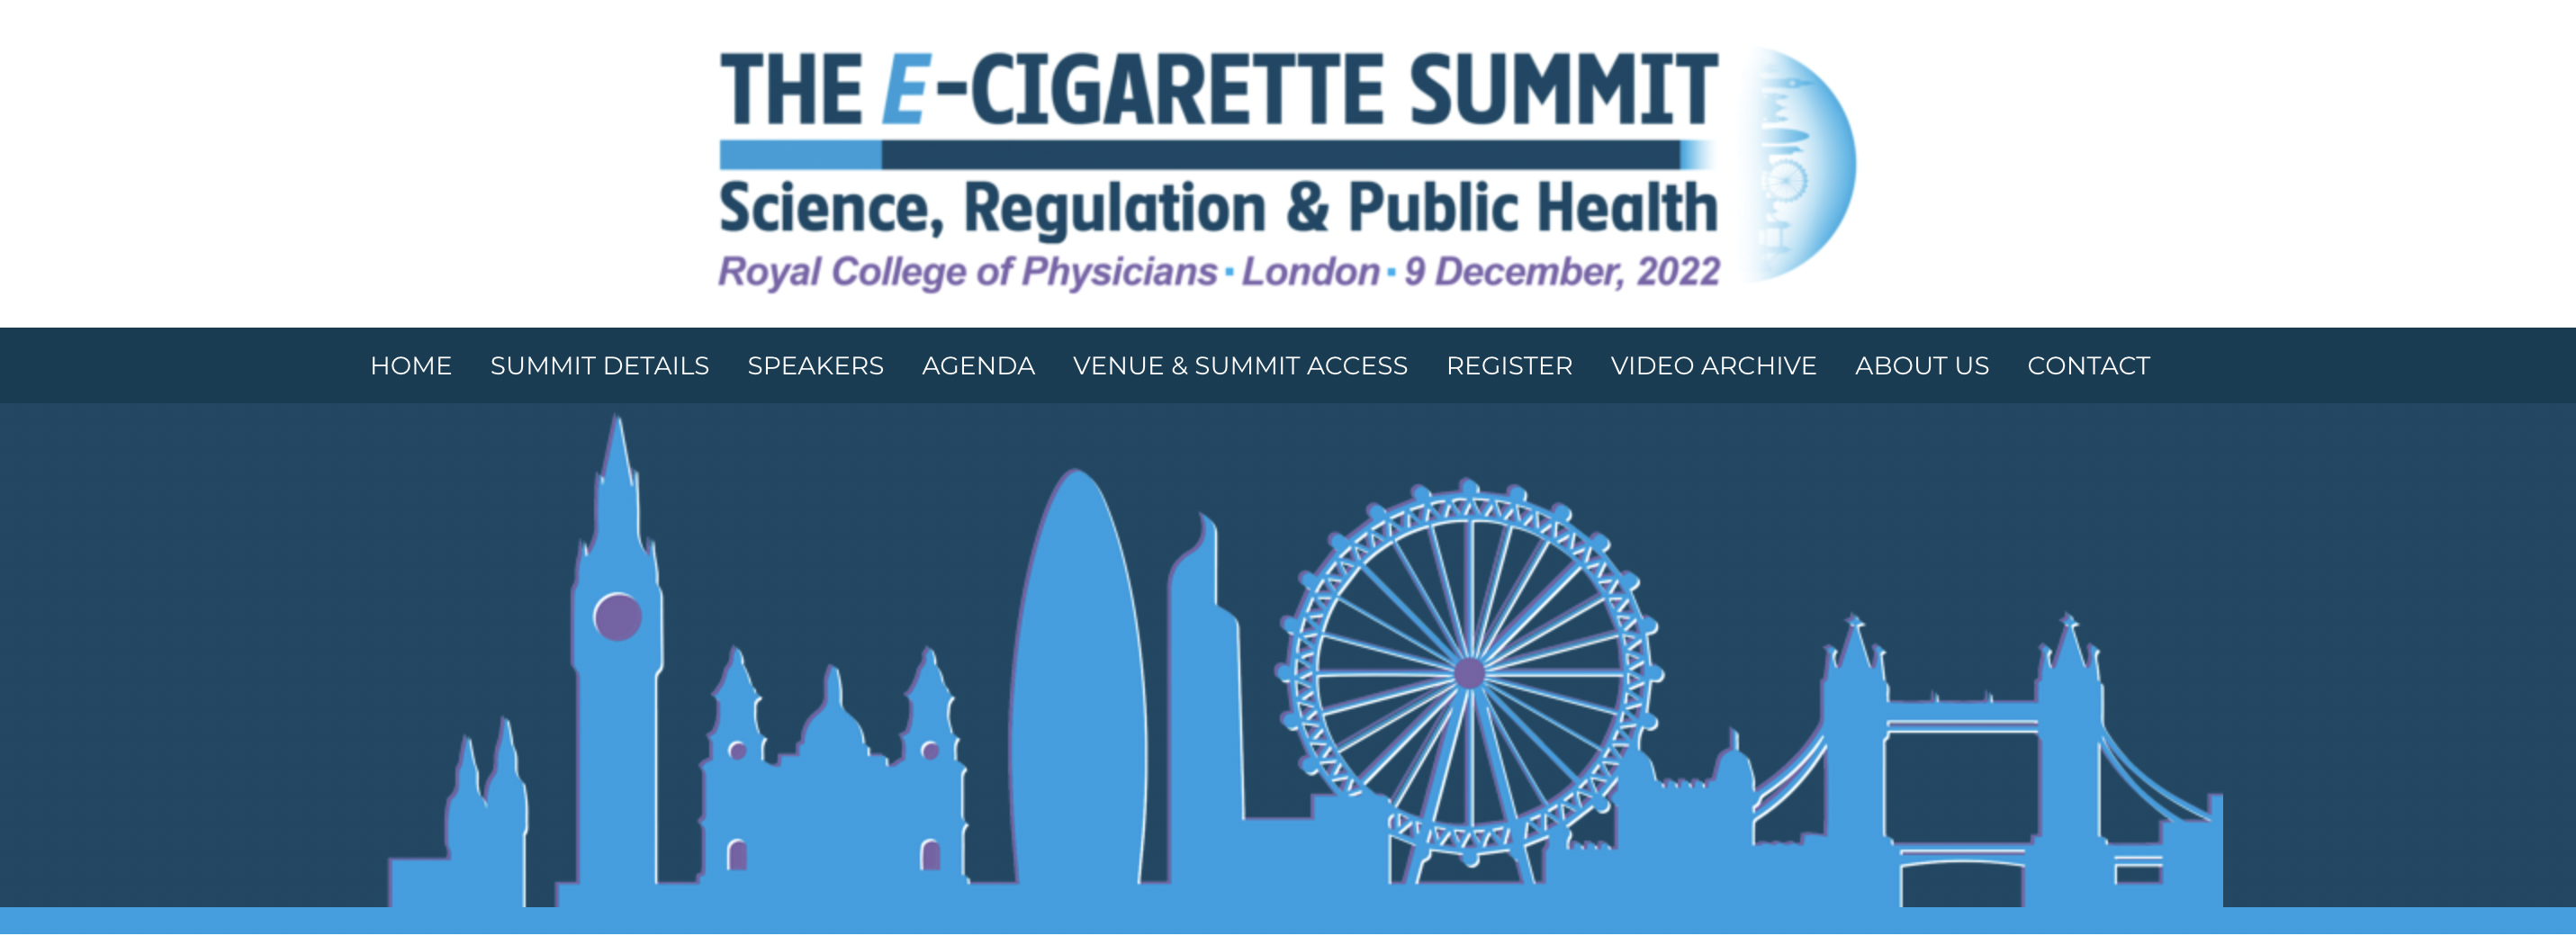 The E-cigarette Summit Opens Today at RCP London